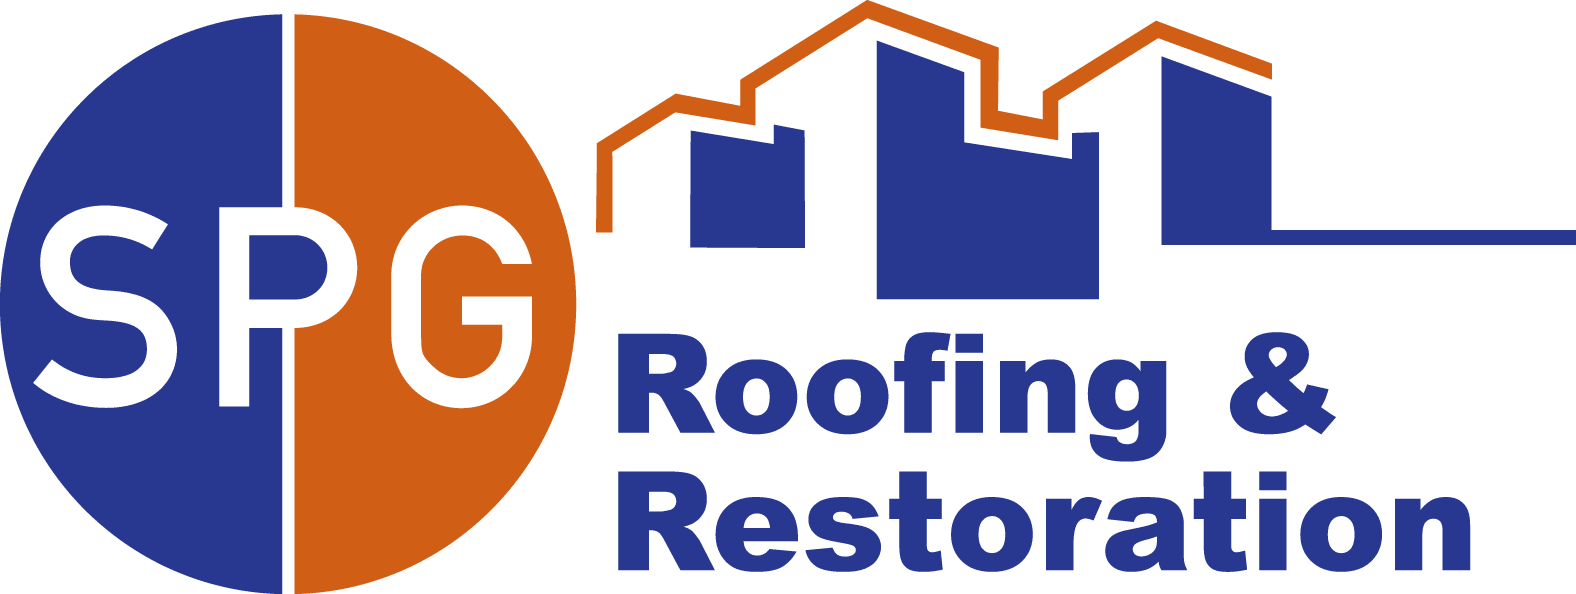 SPG Roofing  Exteriors